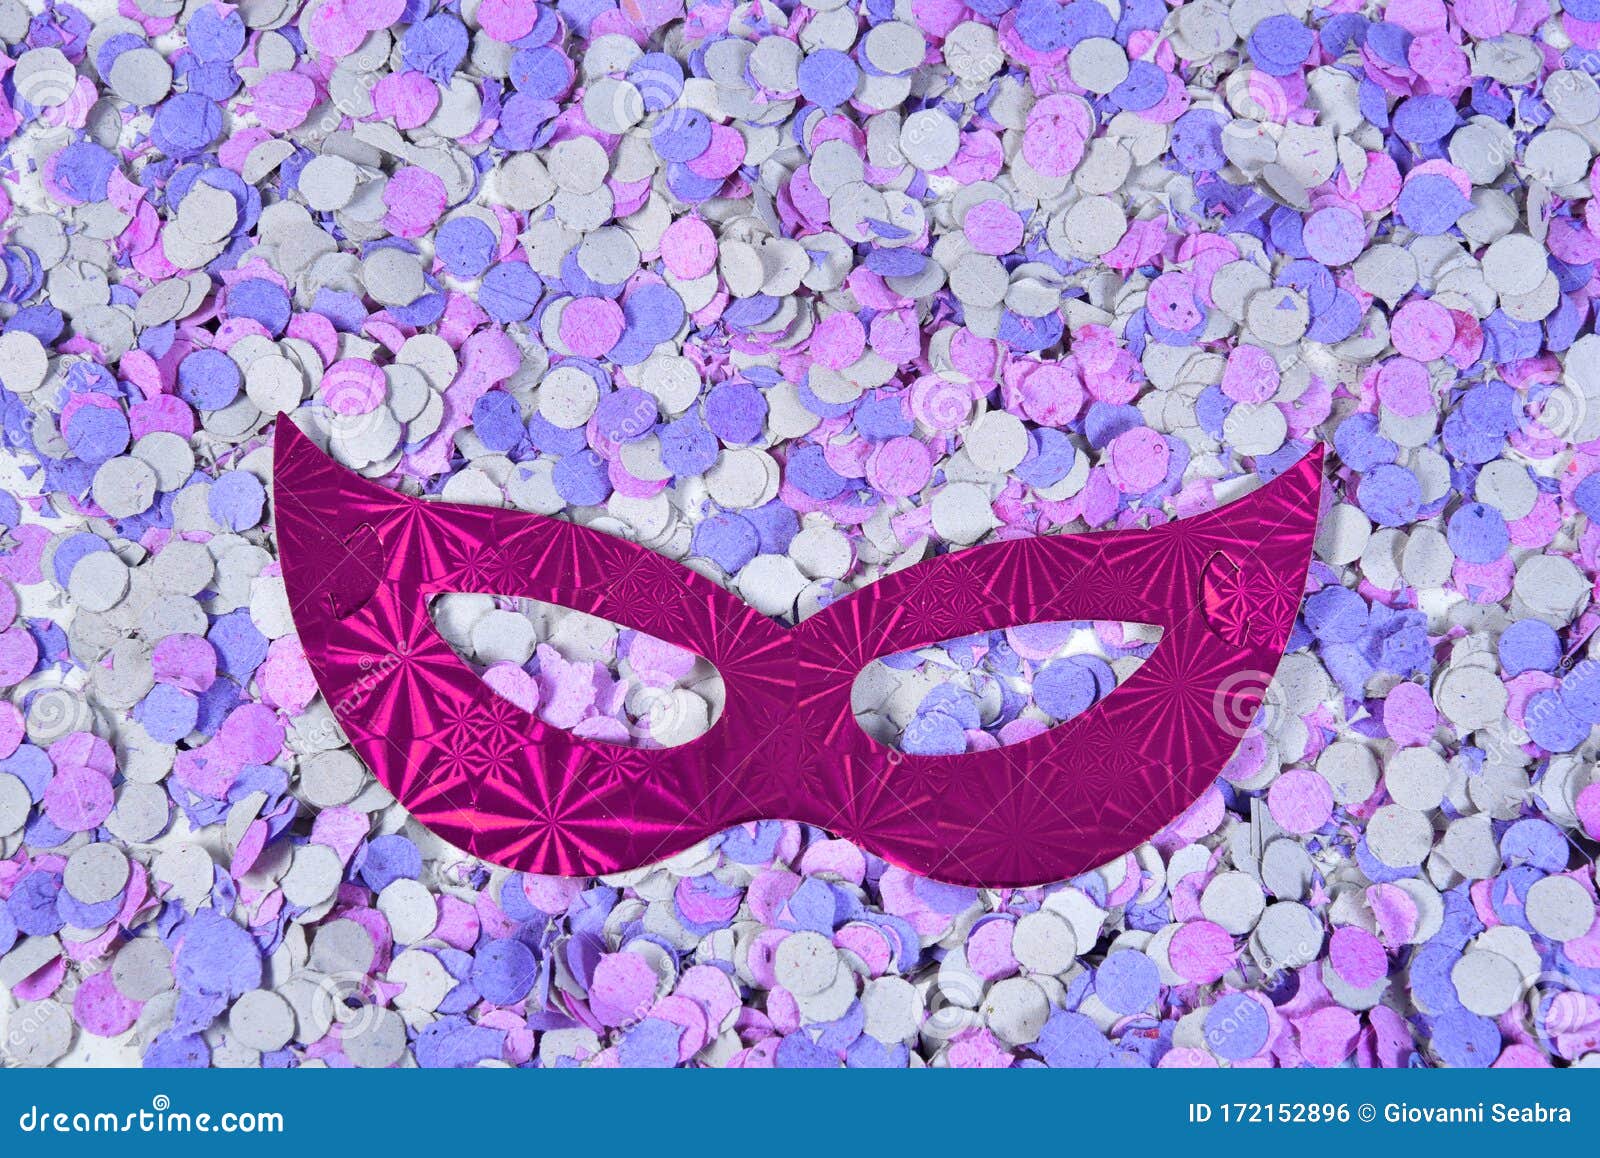 red brazilian carnival party costume mask on colorful confetti background with space for text